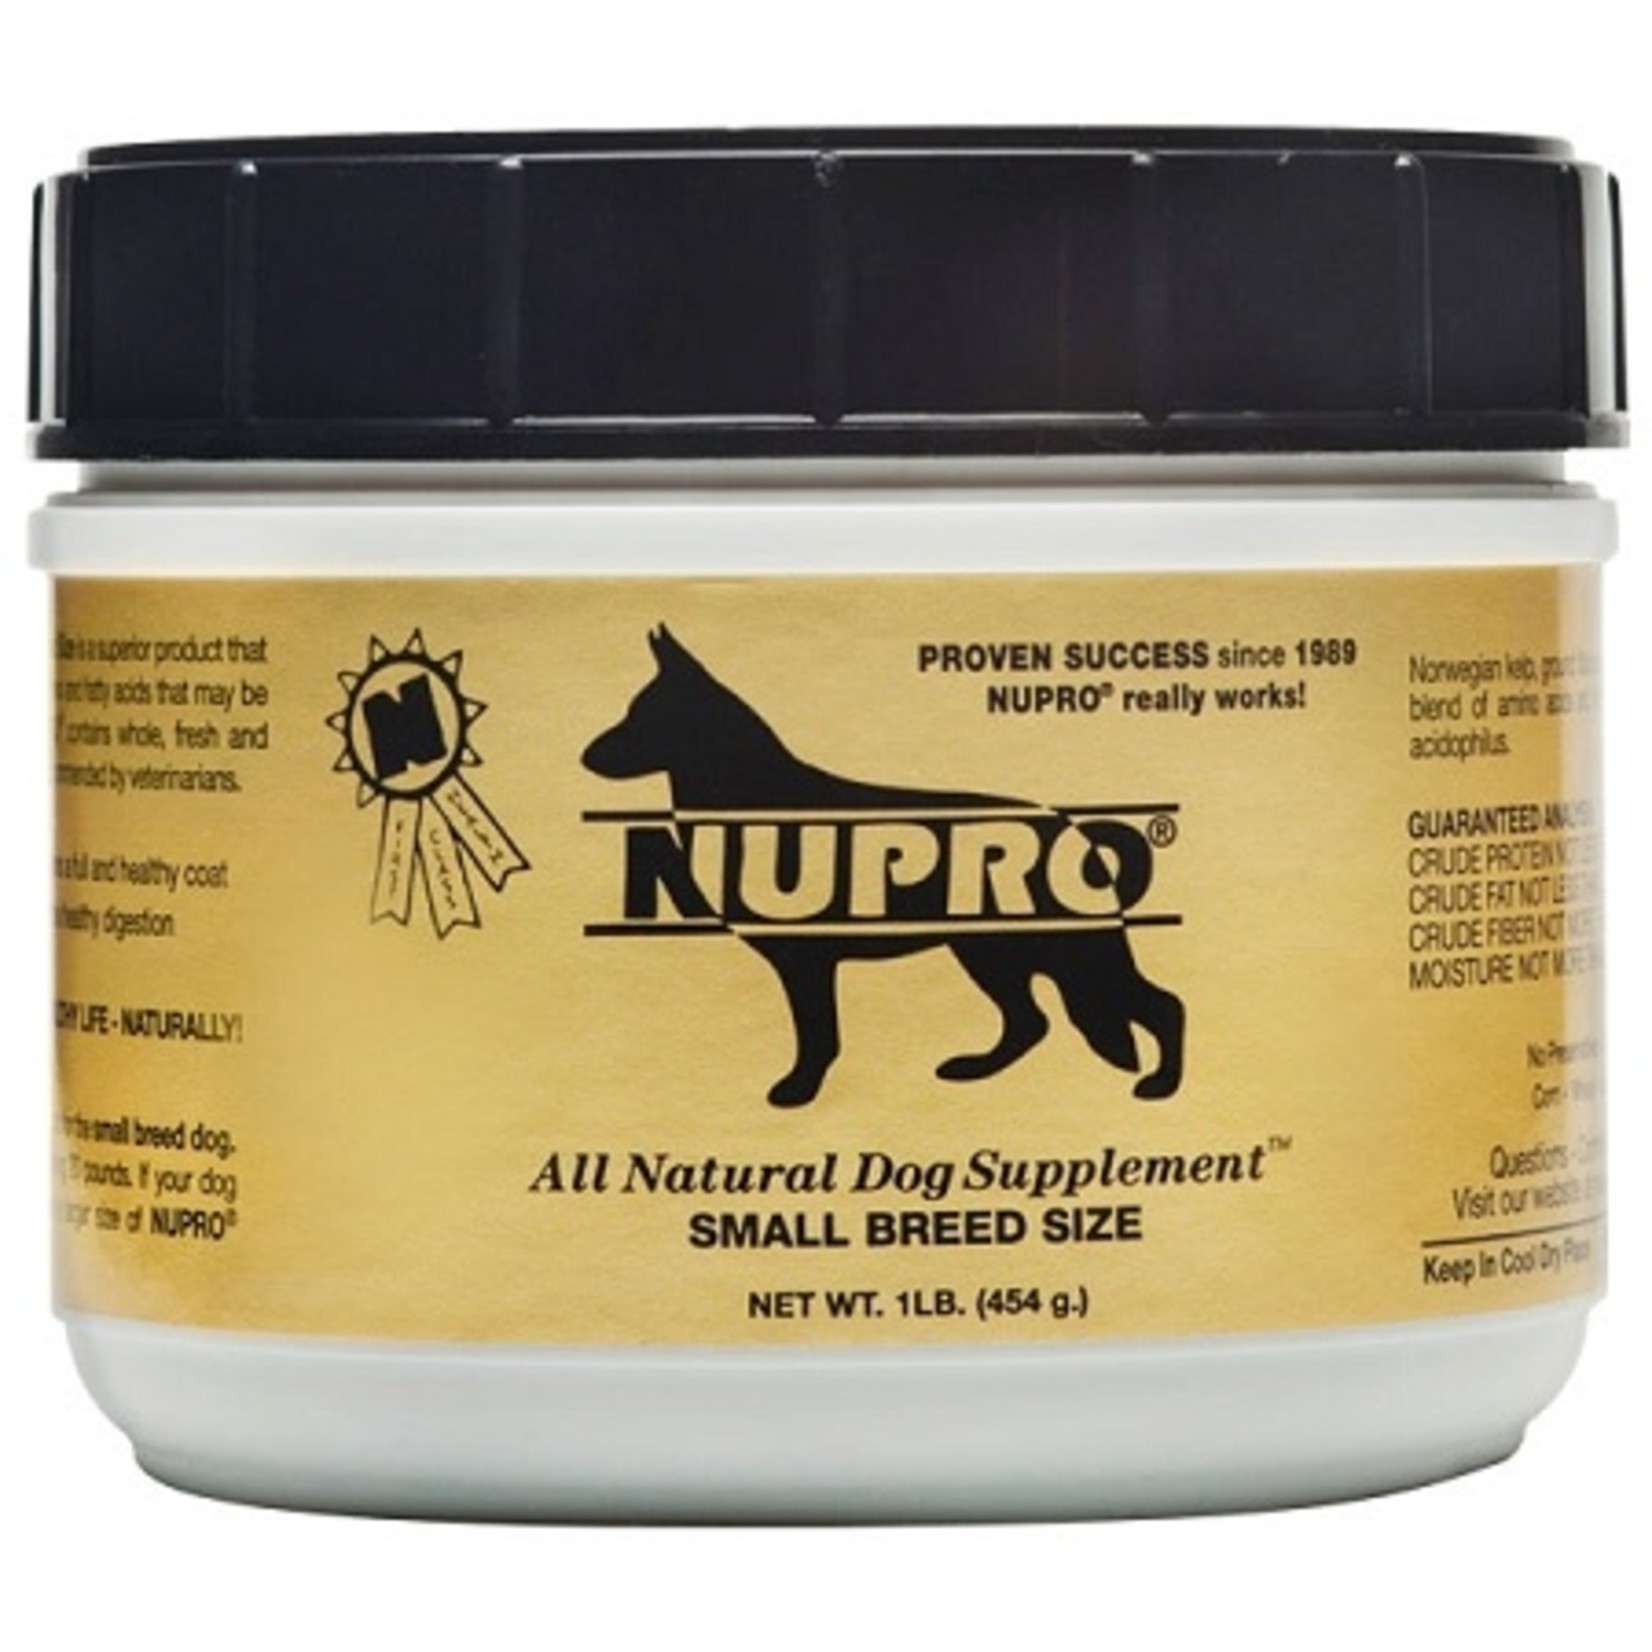 NUPRO NUPRO Natural Dog Supplement Small Breed 1lb